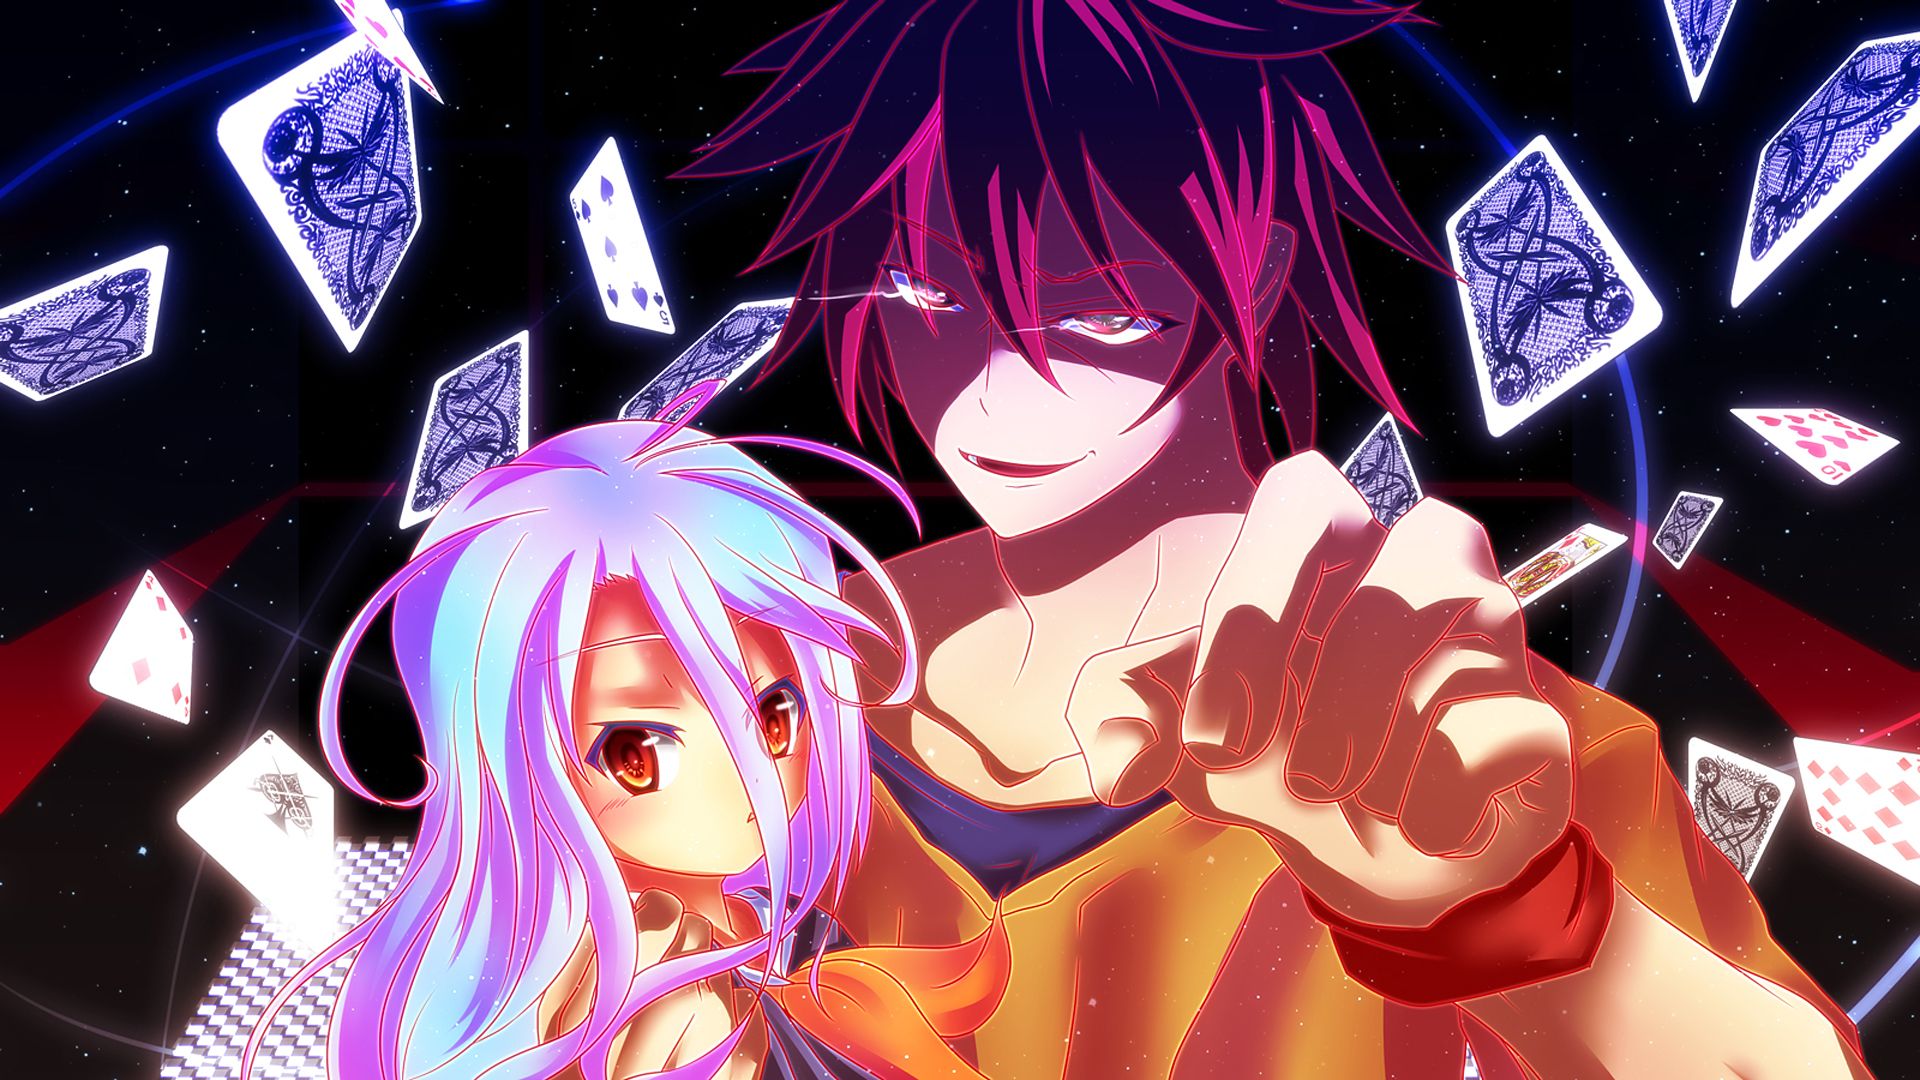 Free download shiro and sora no game no life anime HD 1920x1080 1080p wallpaper and [1920x1080] for your Desktop, Mobile & Tablet. Explore Anime Gamer Wallpaper. Anime Wallpaper Sites